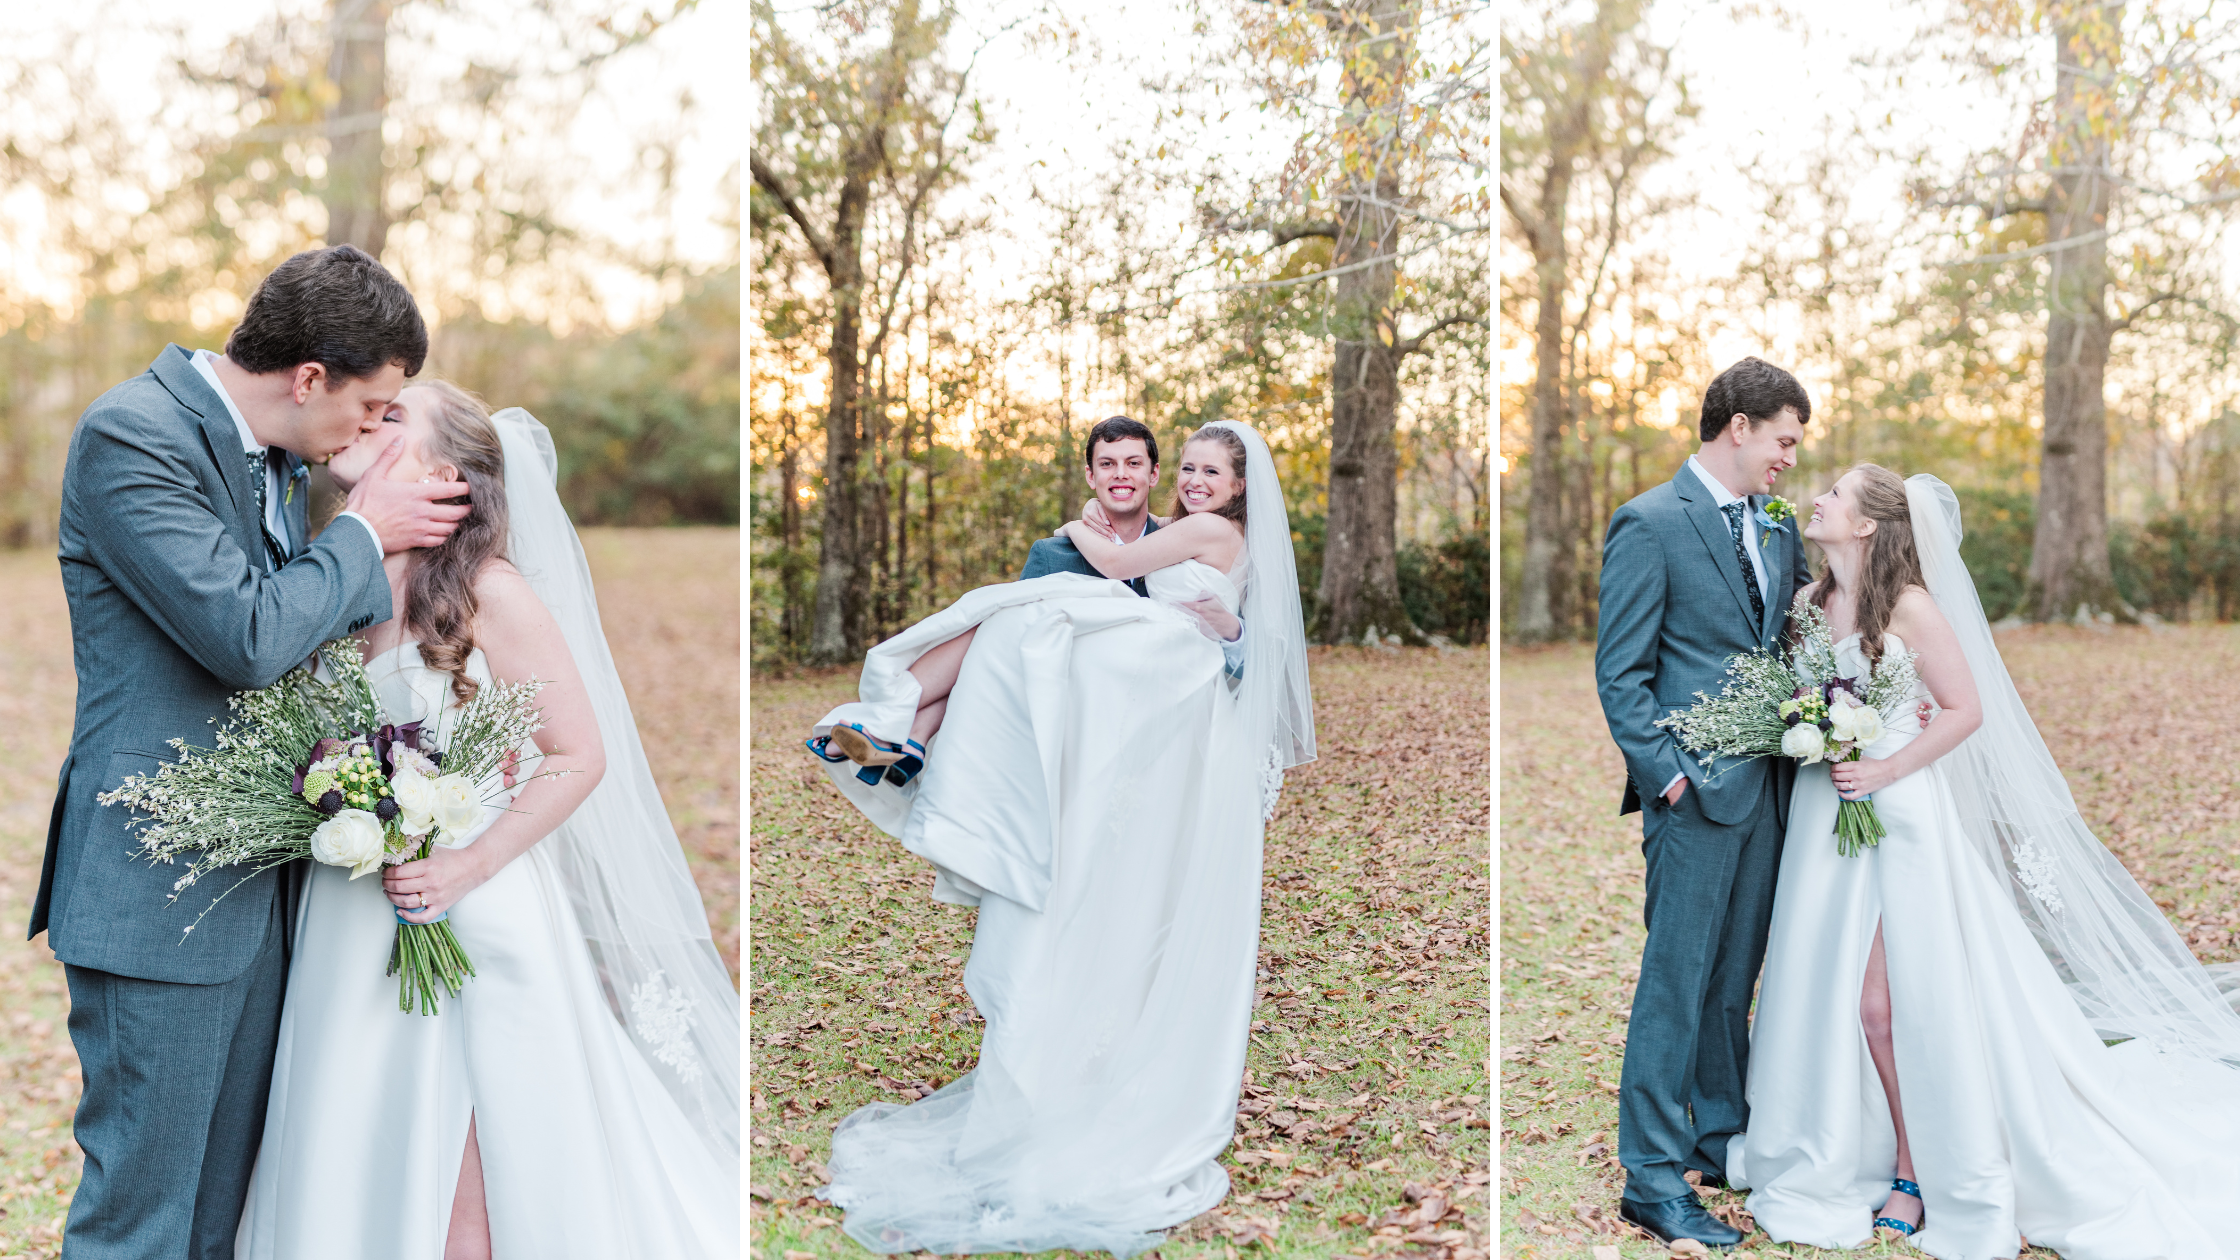 Garden Party Wedding Theme in Greenville, Alabama (AL) Photographed by Kristen Marcus Photography